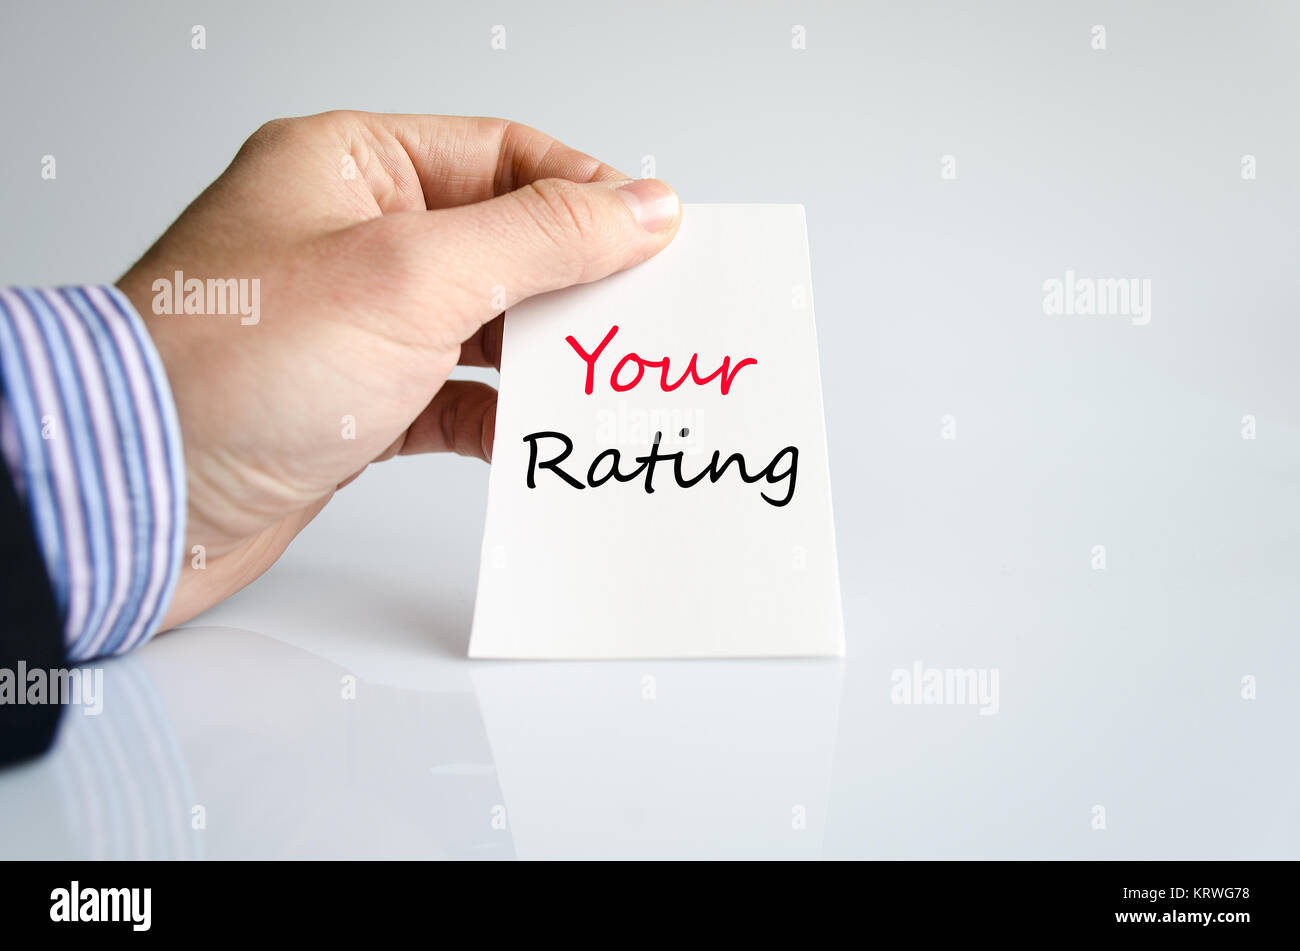 Your rating text concept Stock Photo